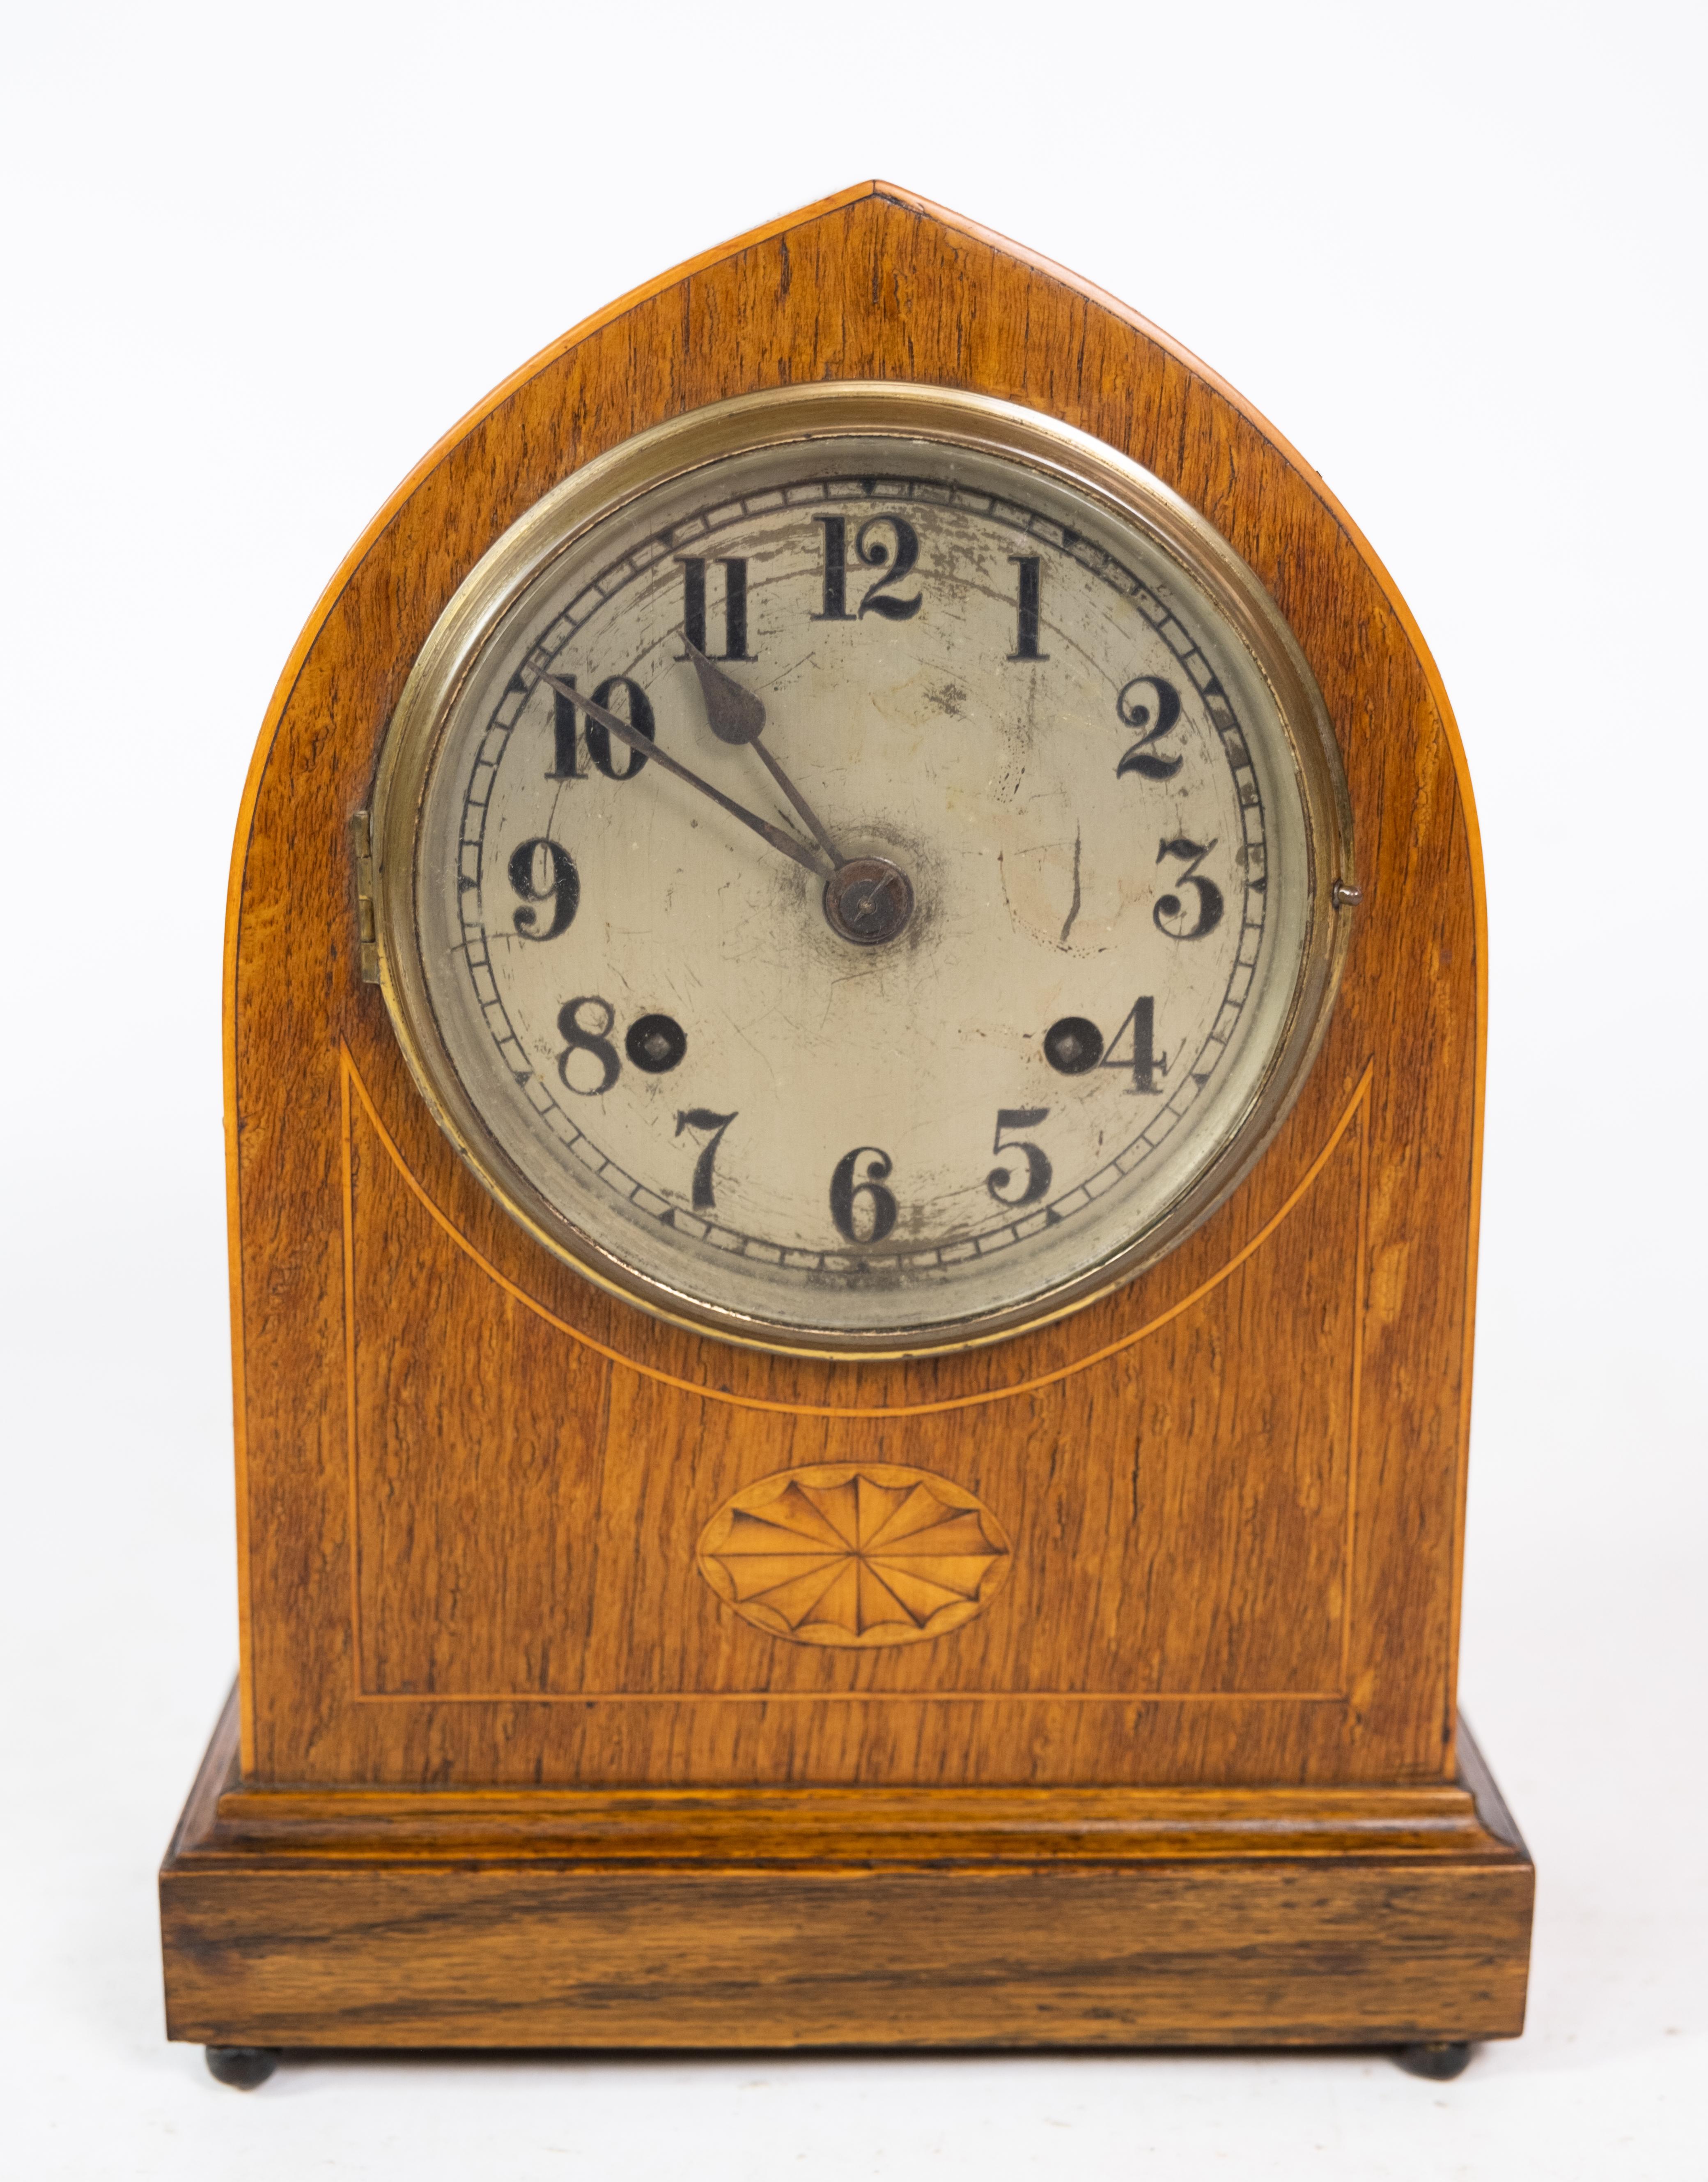 Antique carmine clock in light mahogany with intarsia from around the 1920s.

This product will be inspected thoroughly at our professional workshop by our educated employees, who assure the product quality.